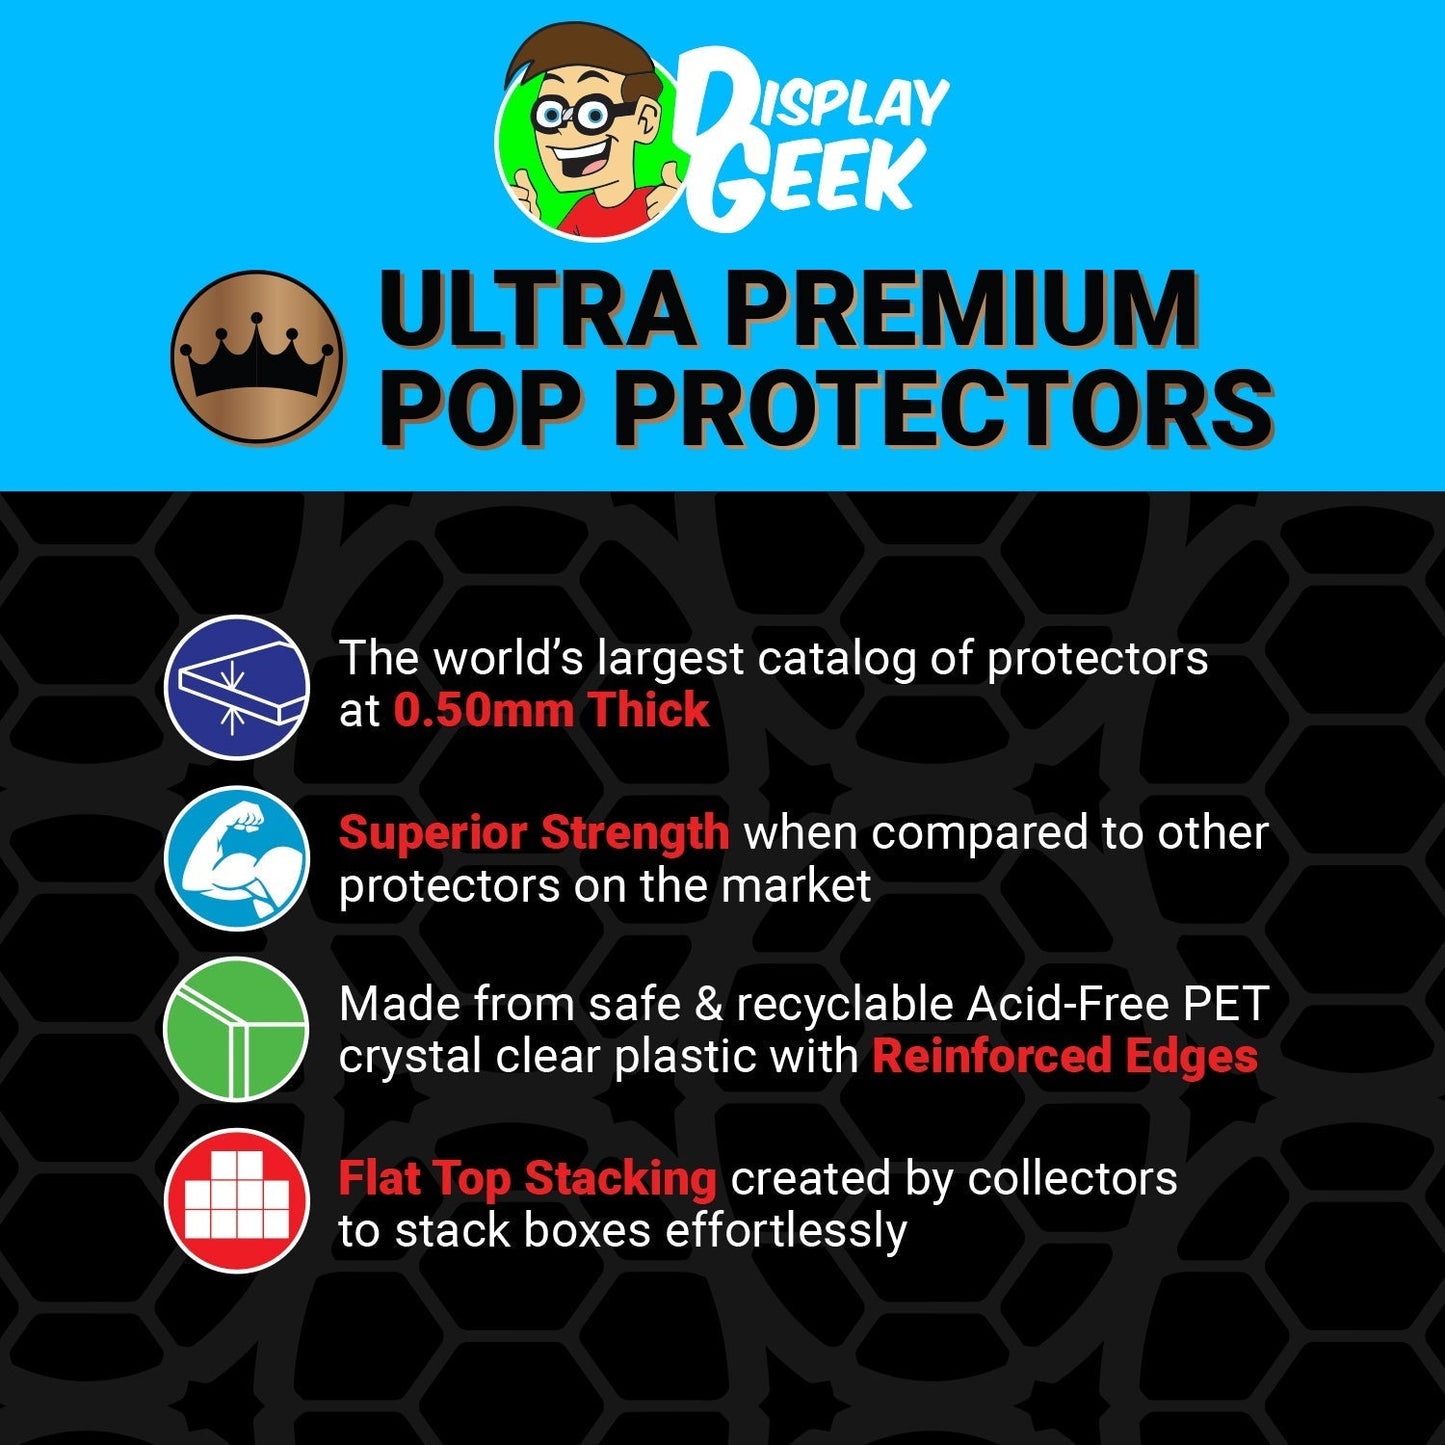 Pop Protector for 9 inch Giant Steamboat Willie Blue & Red Redux D23 Expo Funko - PPG Pop Protector Guide Search Created by Display Geek